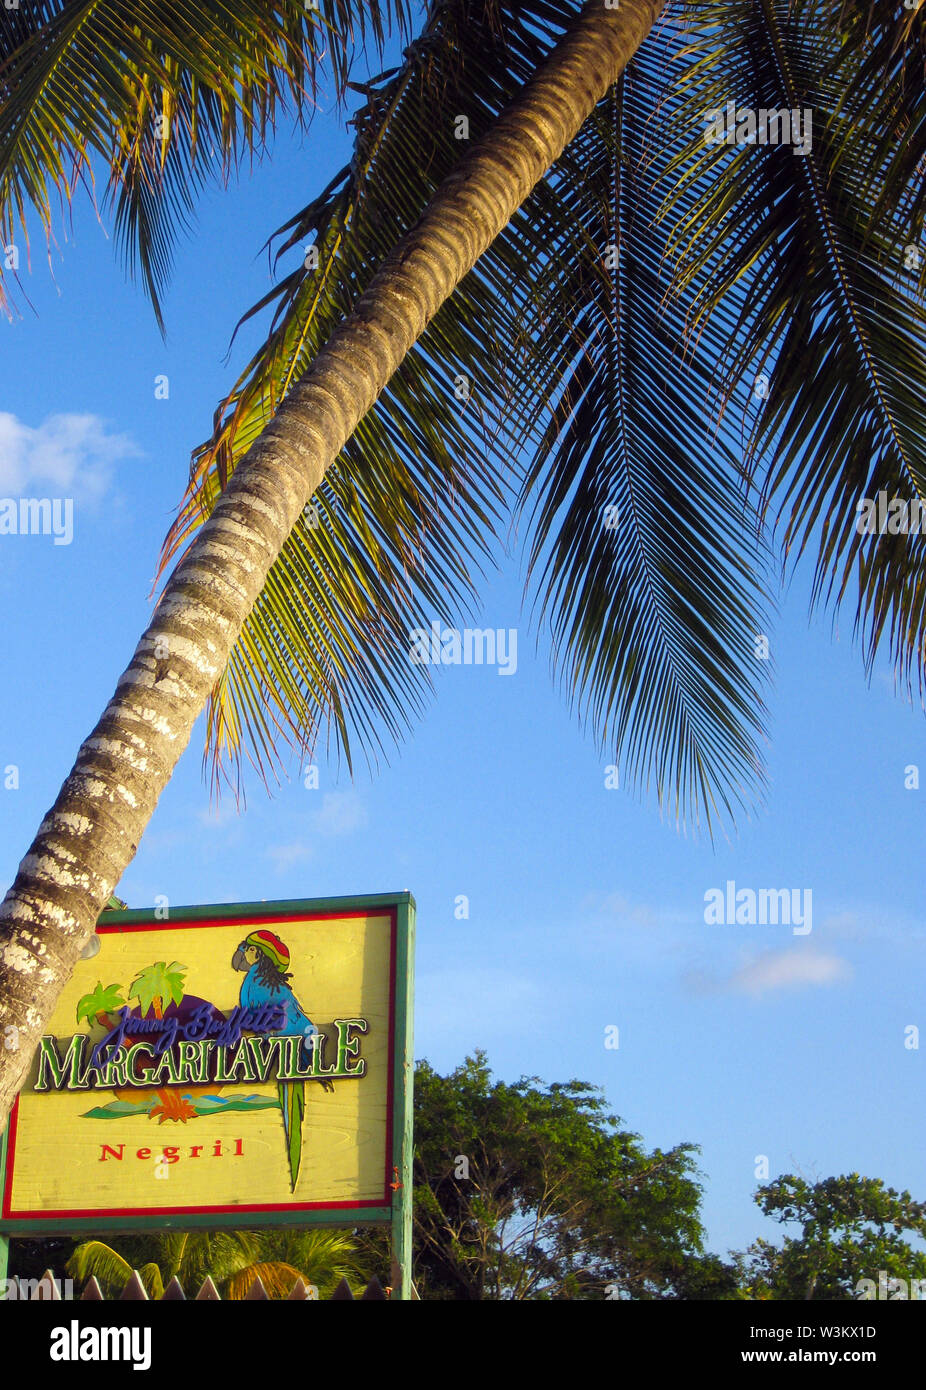 NEGRIL, JAMAICA - MAY 24. 2010: Margaritaville sign with palm tree on Bourbon beach Stock Photo